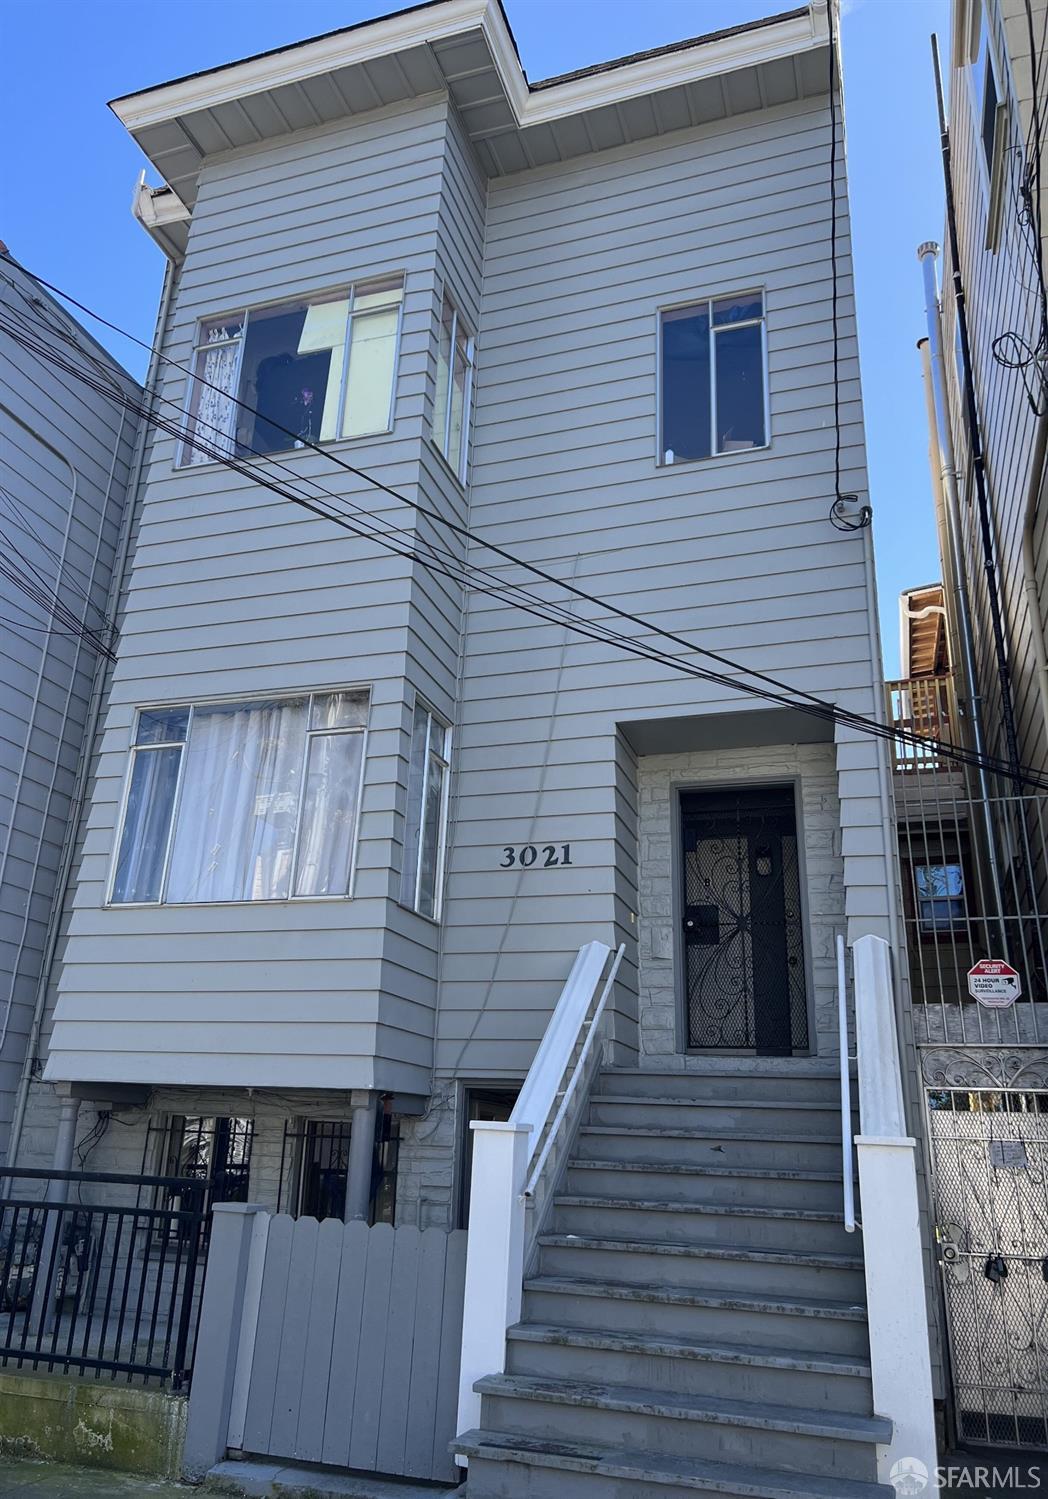 Photo of 3021 22nd St in San Francisco, CA